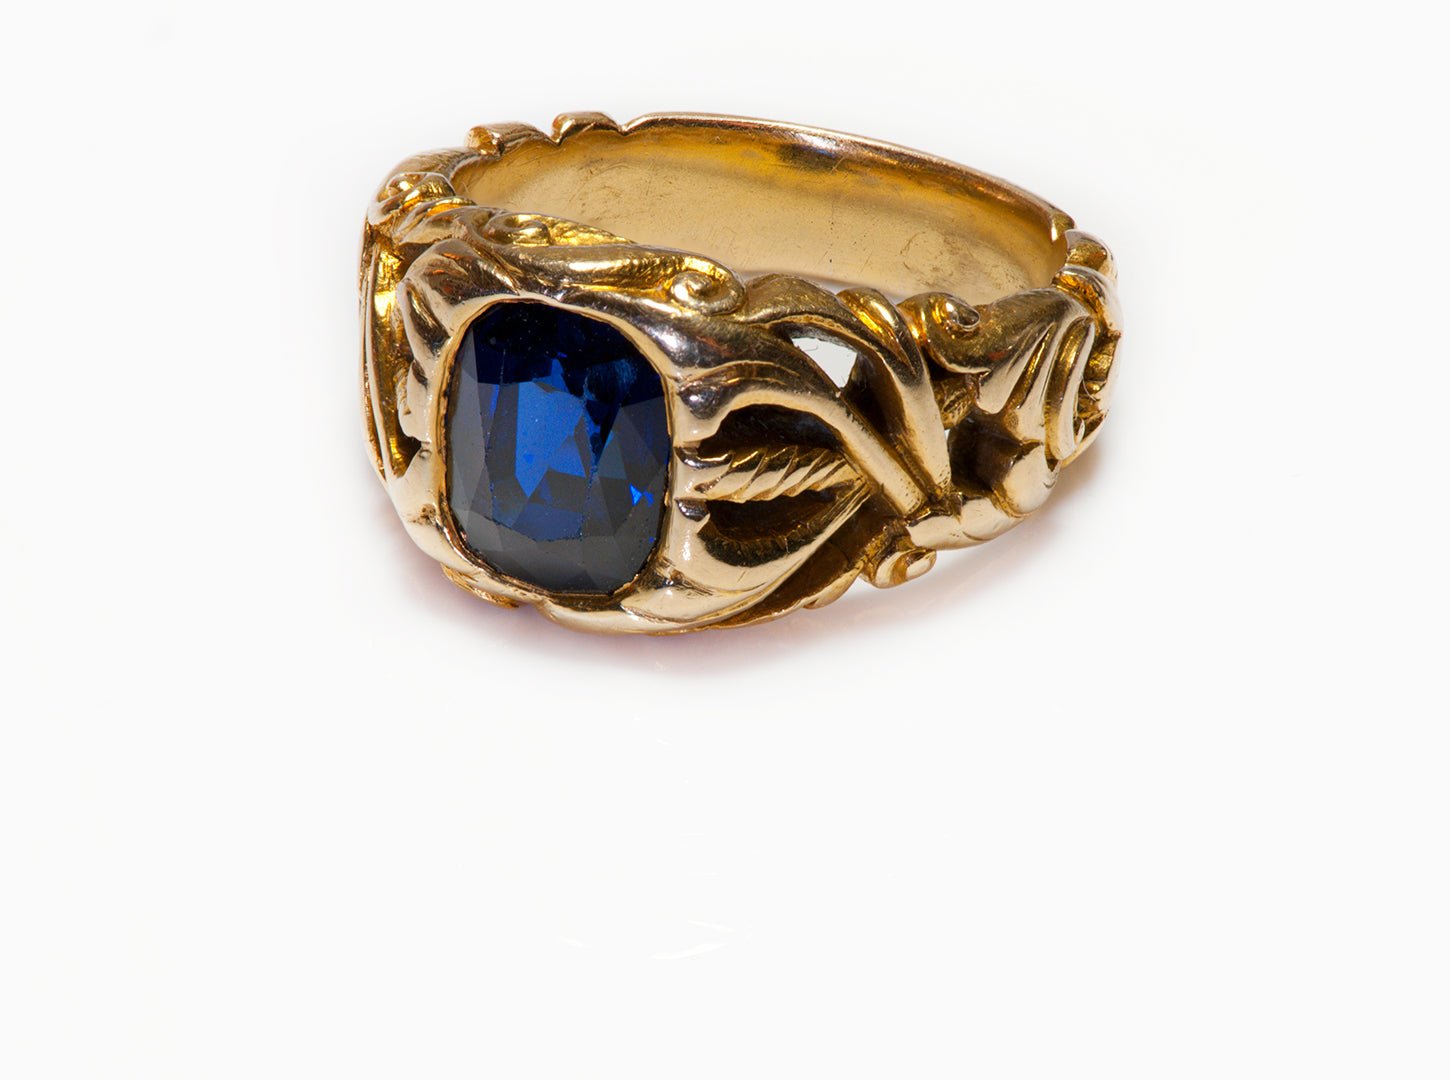 Antique Tiffany & Co. 18K Gold Sapphire Ring